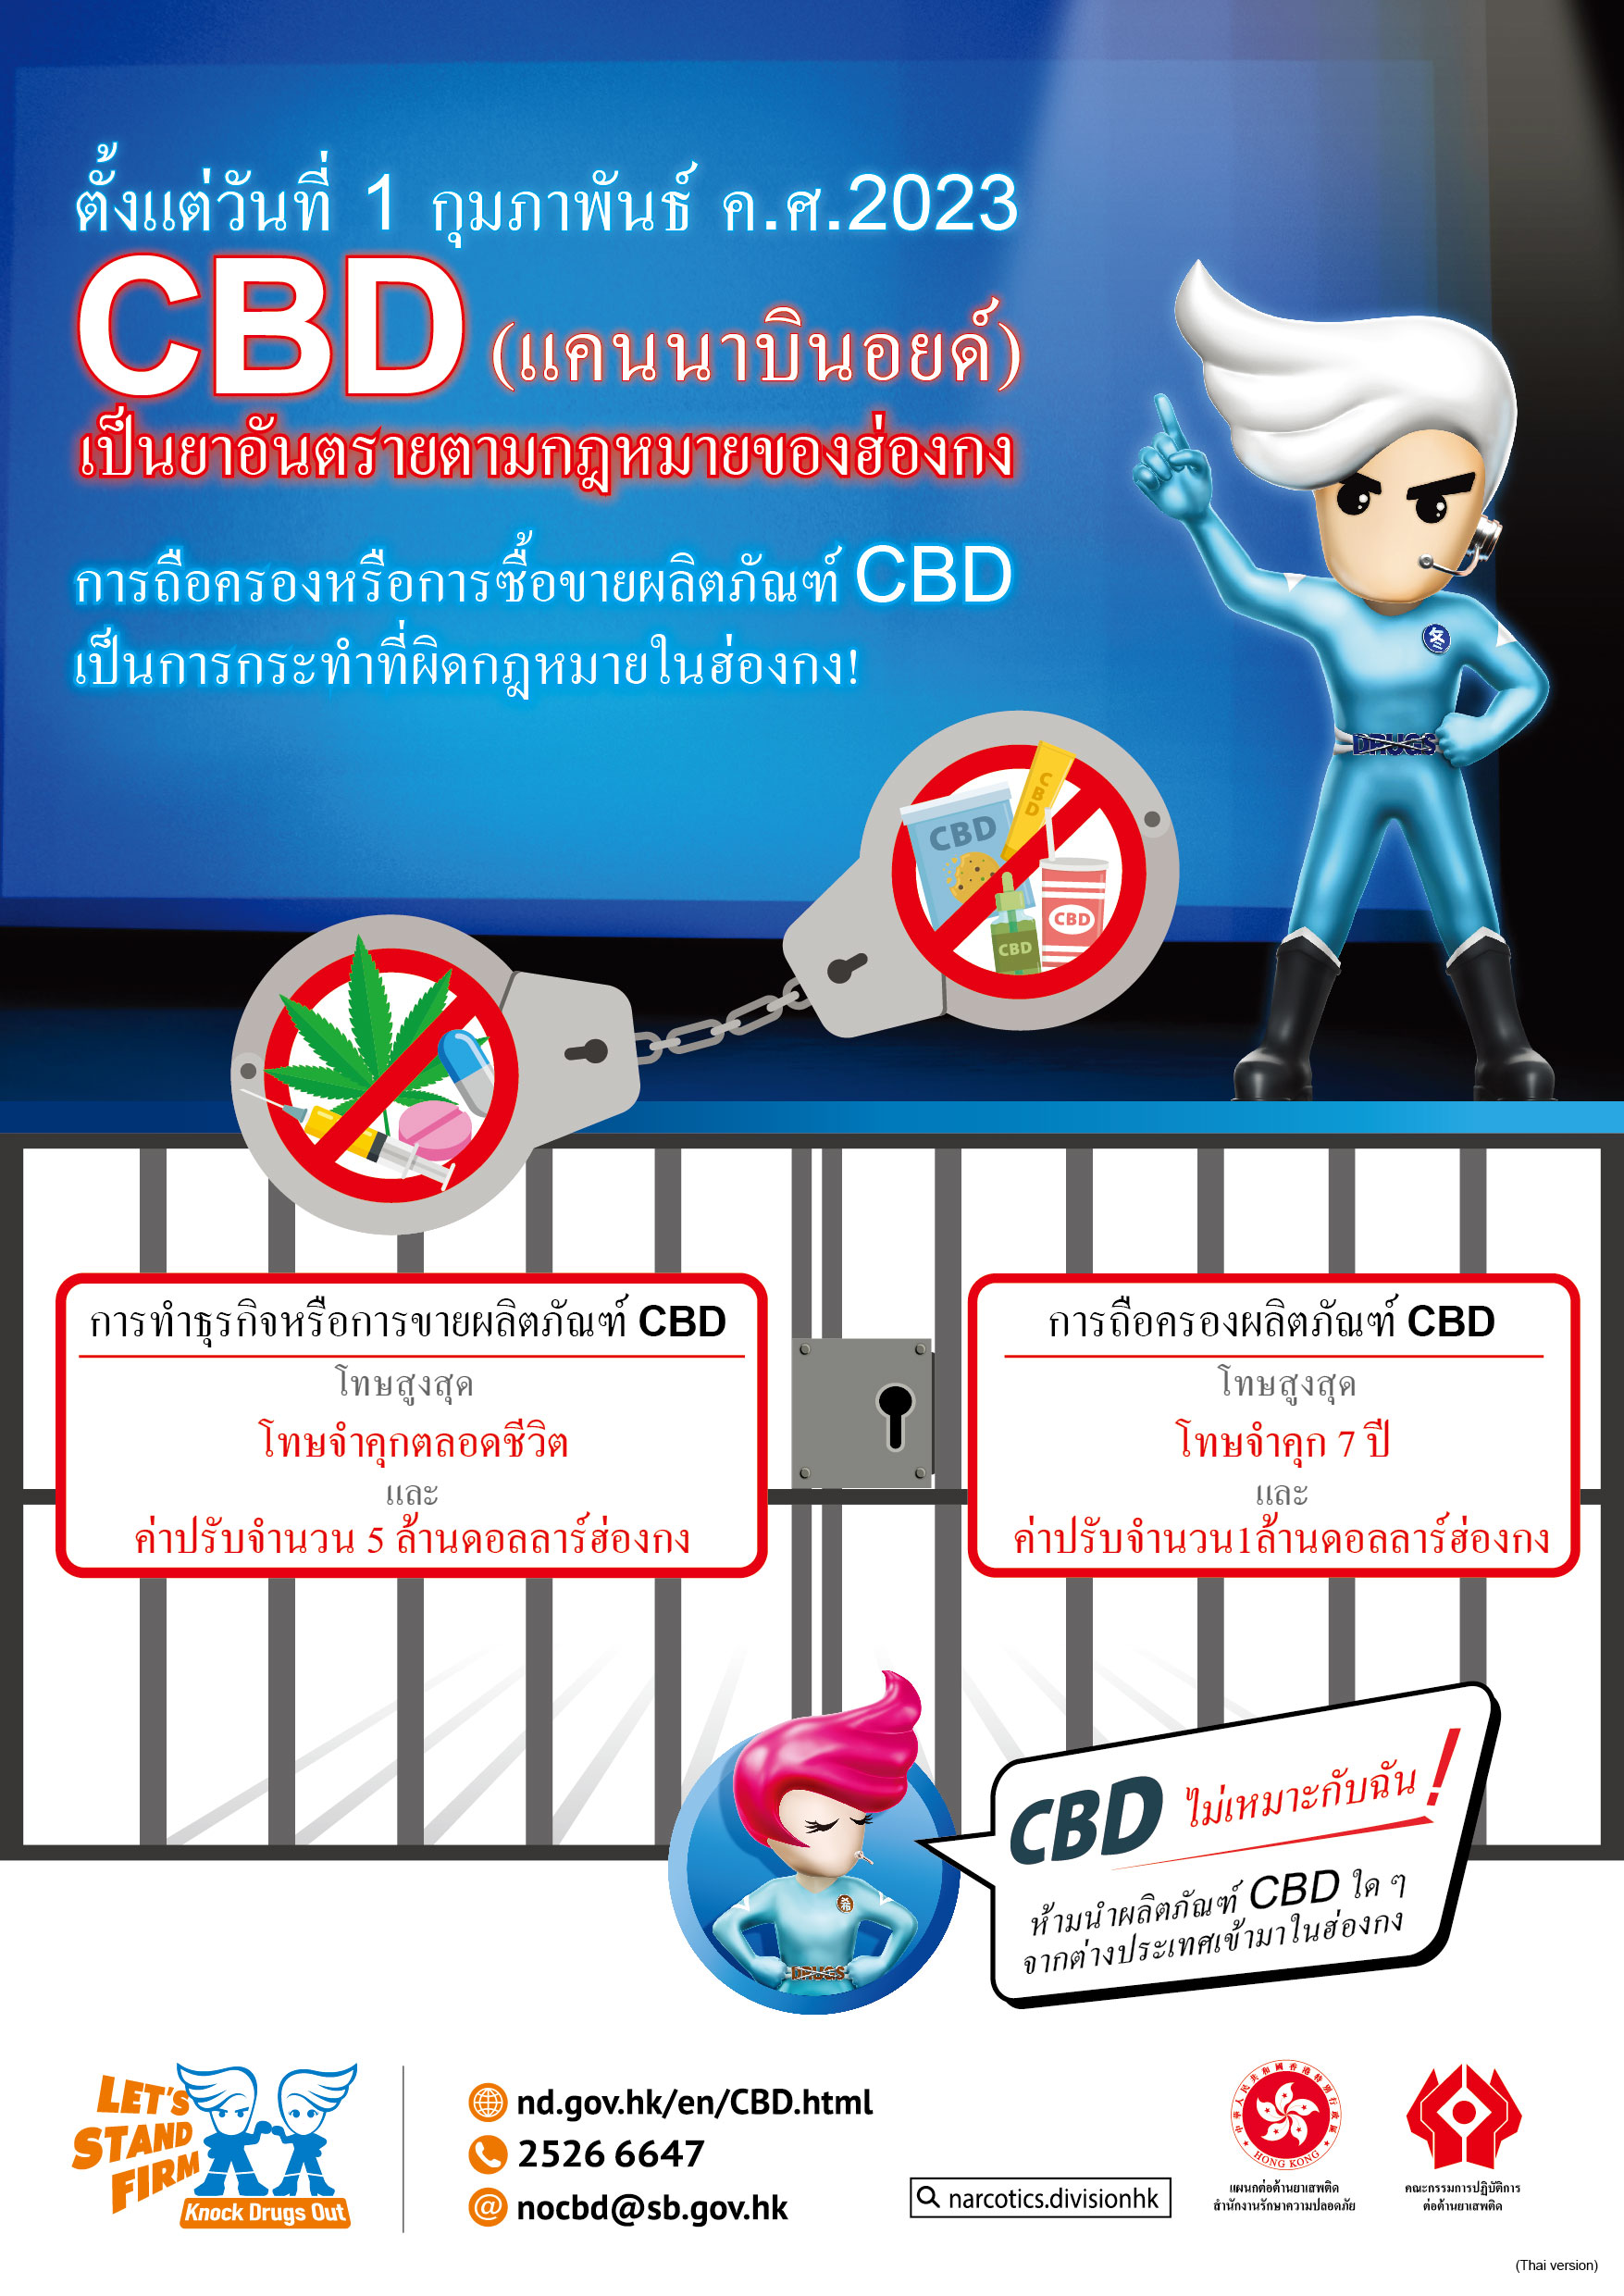 Anti-drug poster “CBD, Not for me! (Commencement of Law)” – Thai version